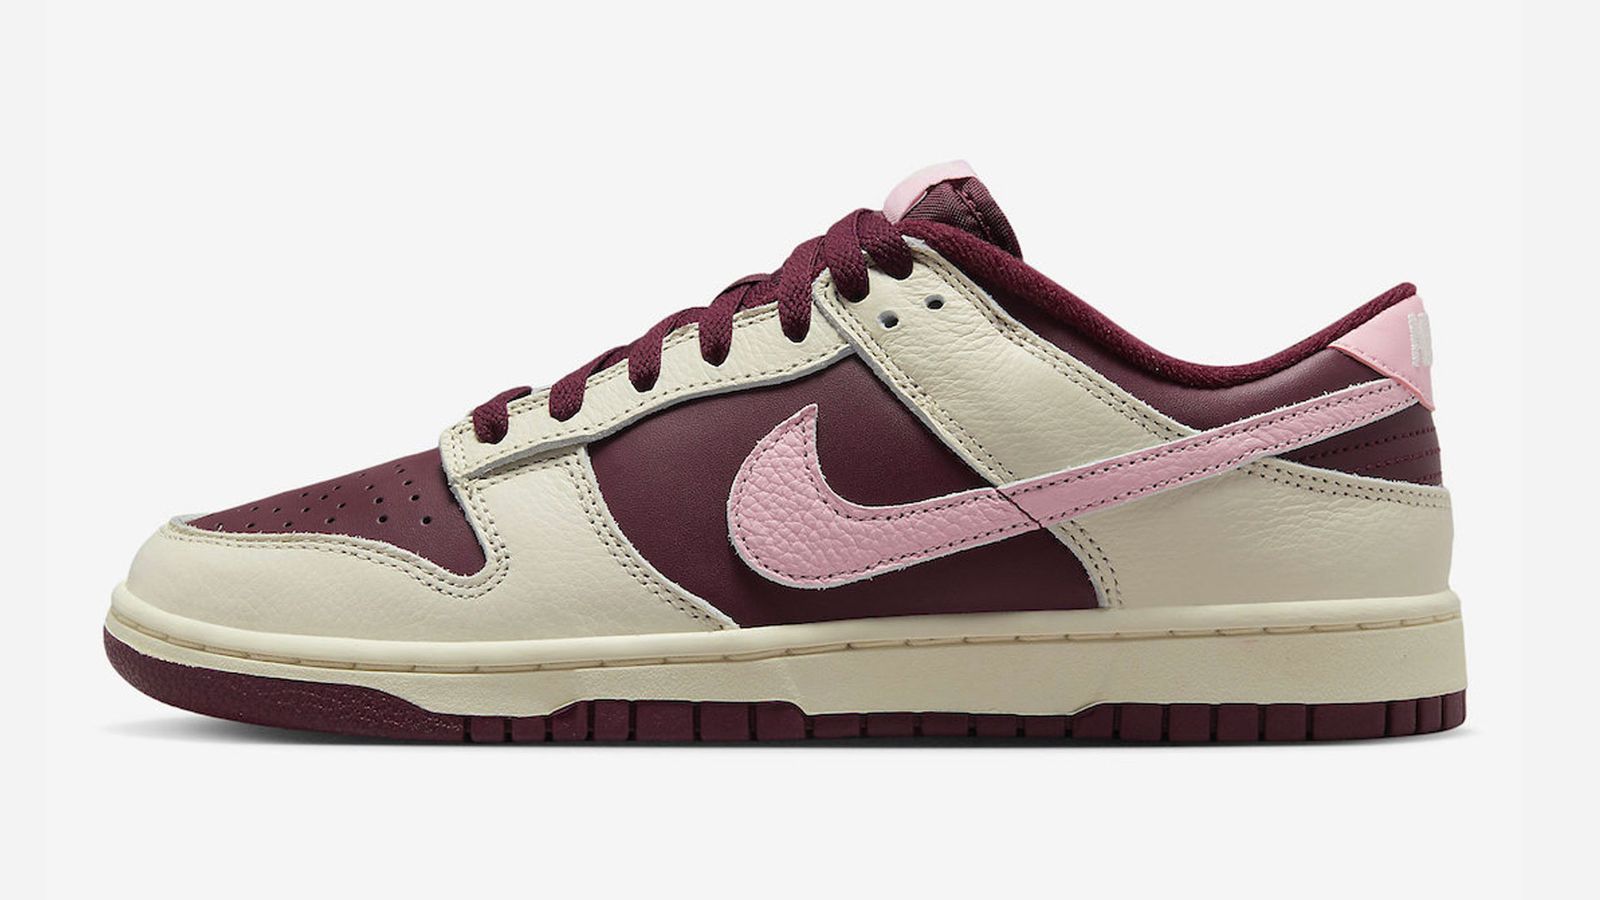 Best sneakers for Valentine's Day - Nike Dunk Low "Night Maroon and Medium Soft Pink" product image of a Cream and Maroon sneaker with a Pink Swoosh.